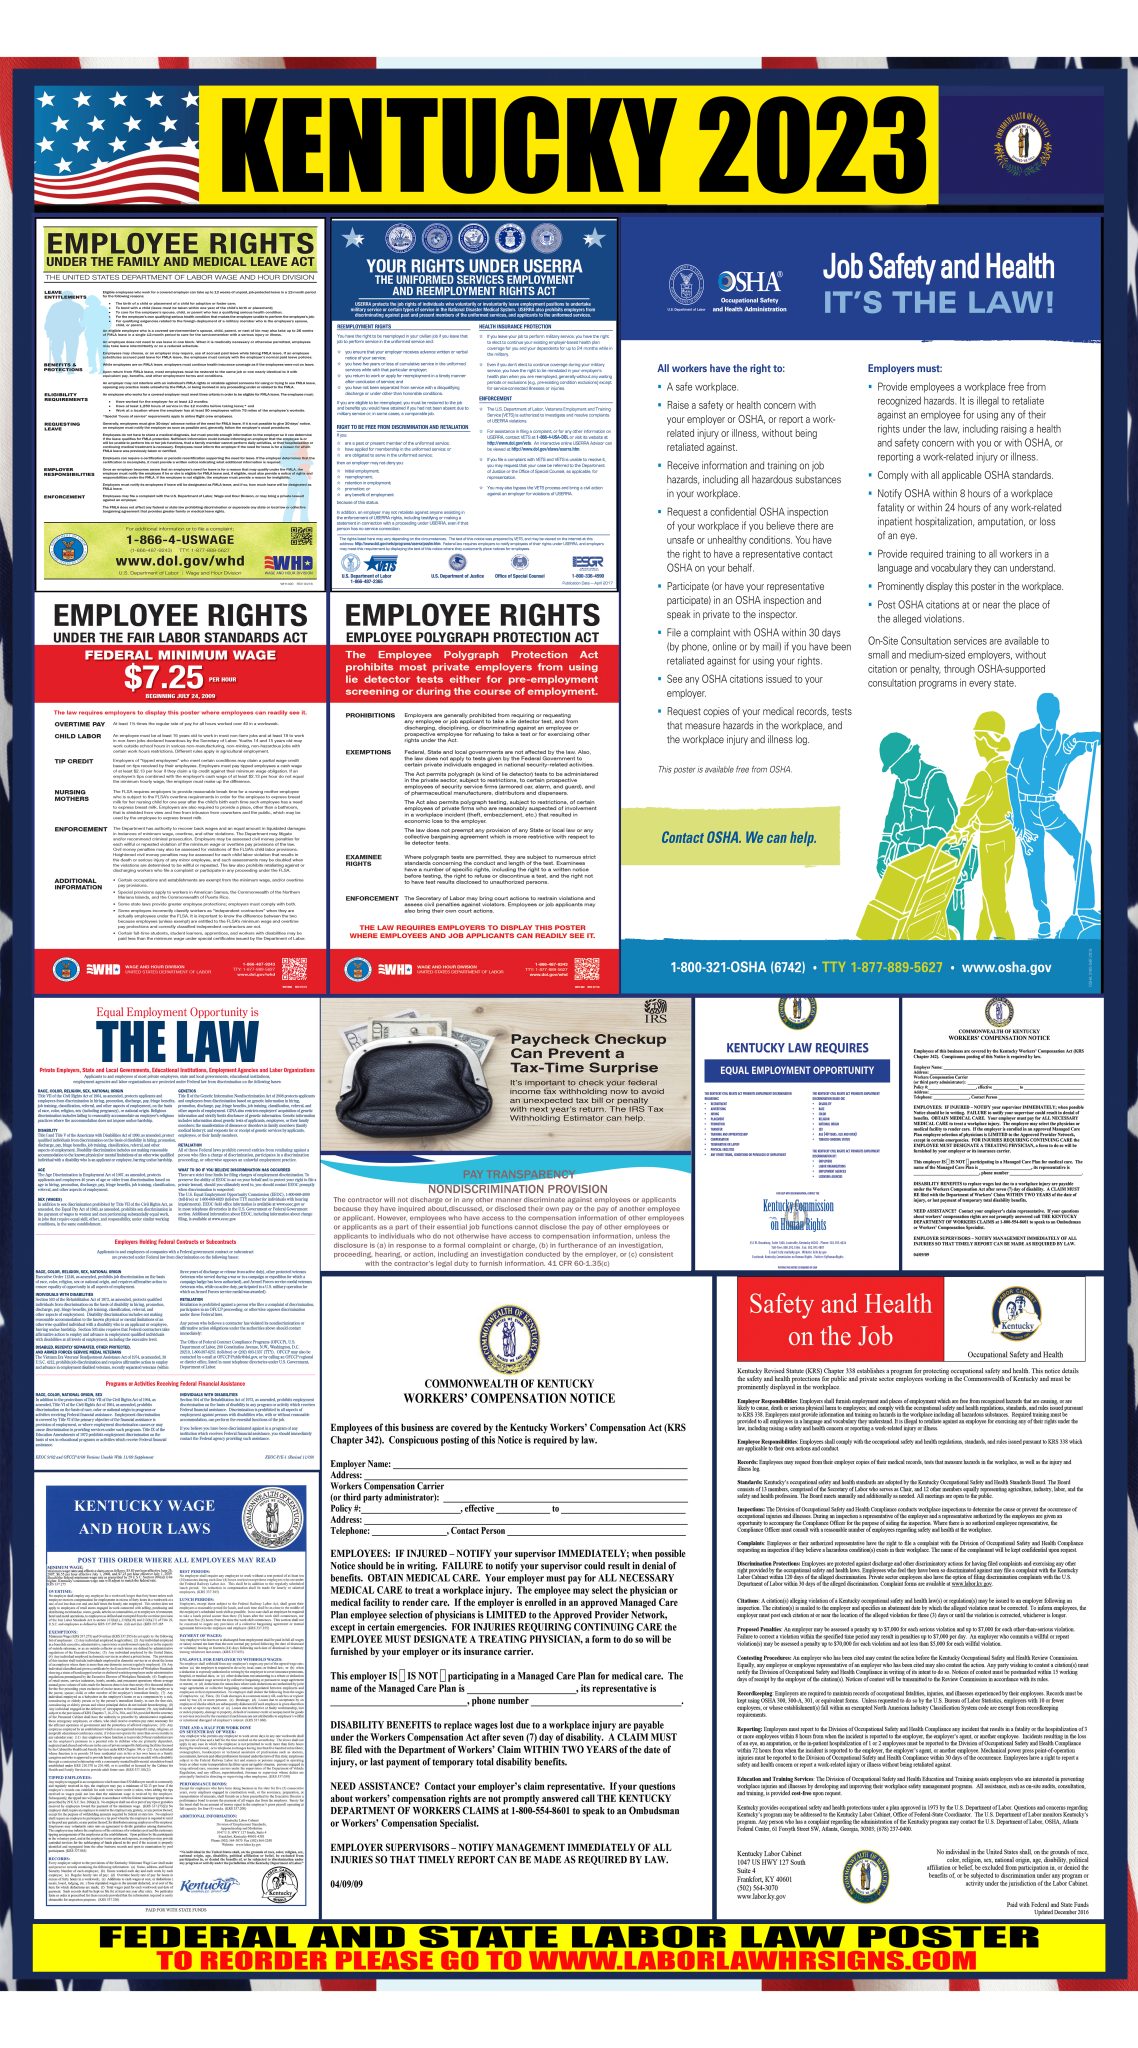 2023-kentucky-labor-law-posters-state-federal-osha-laborlawhrsigns